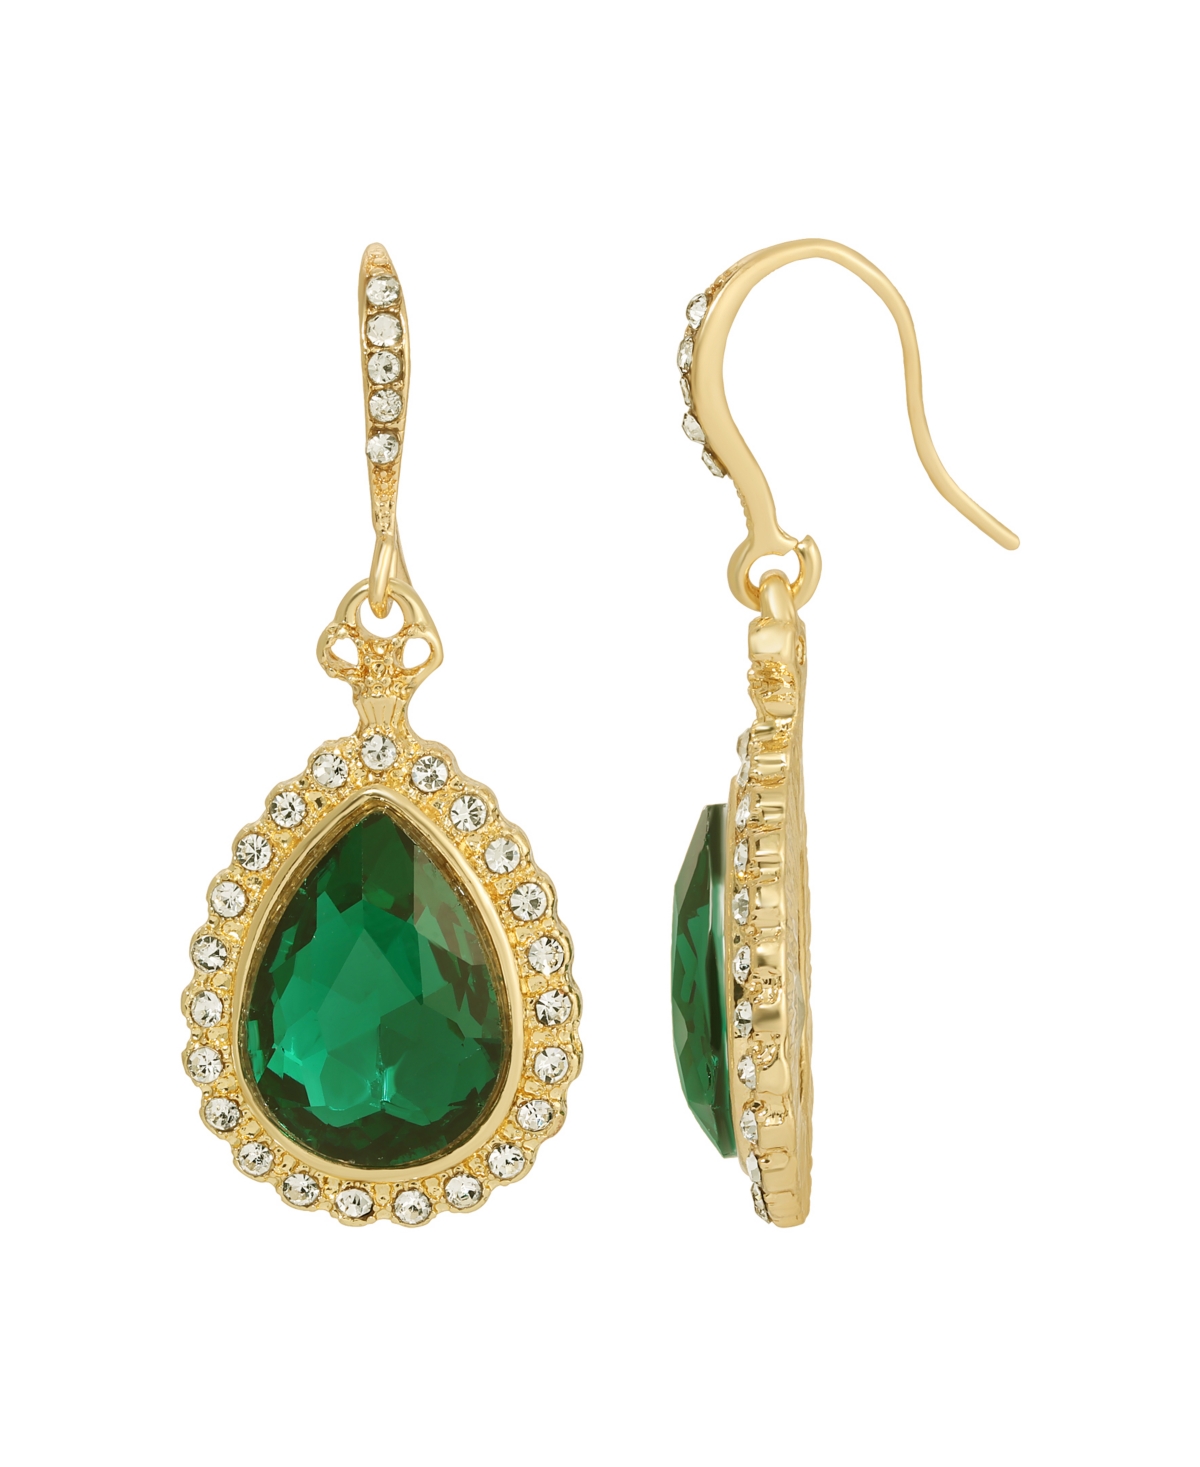 Victorian Costume Jewelry to Wear with Your Dress 2028 Gold-Tone Teardrop Earrings - Green $22.40 AT vintagedancer.com